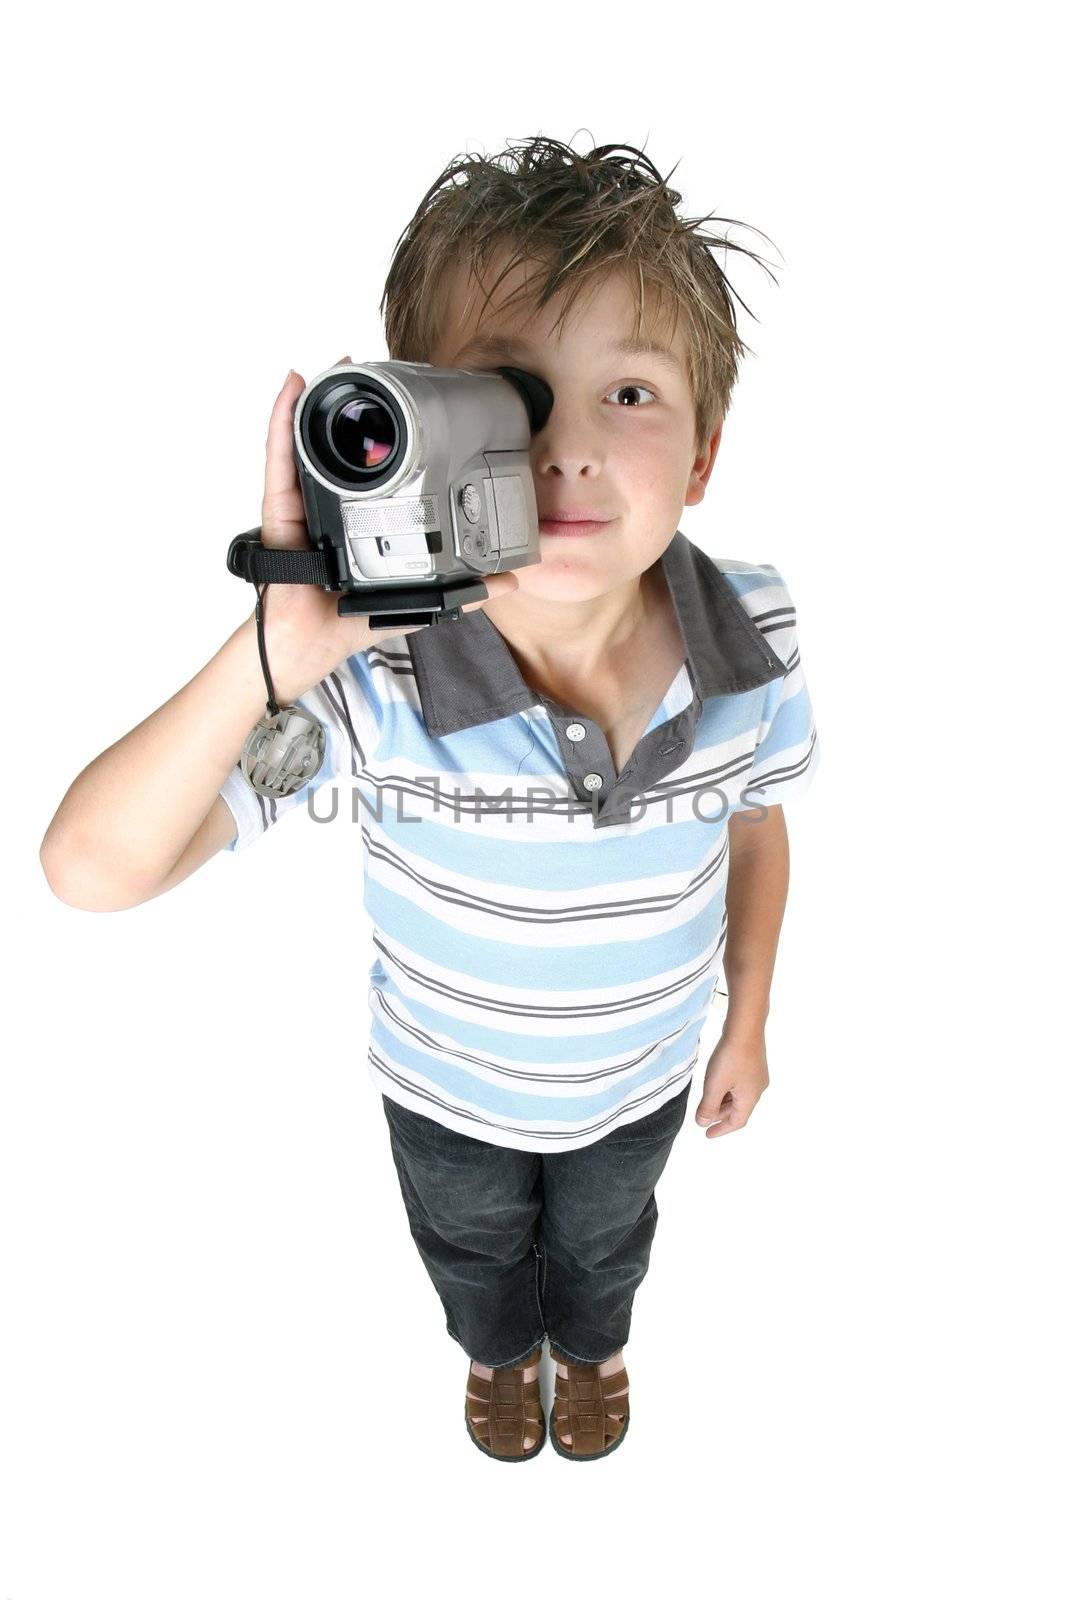 A boy recording videos or taking pictures using a digital video camera,  above perspective.